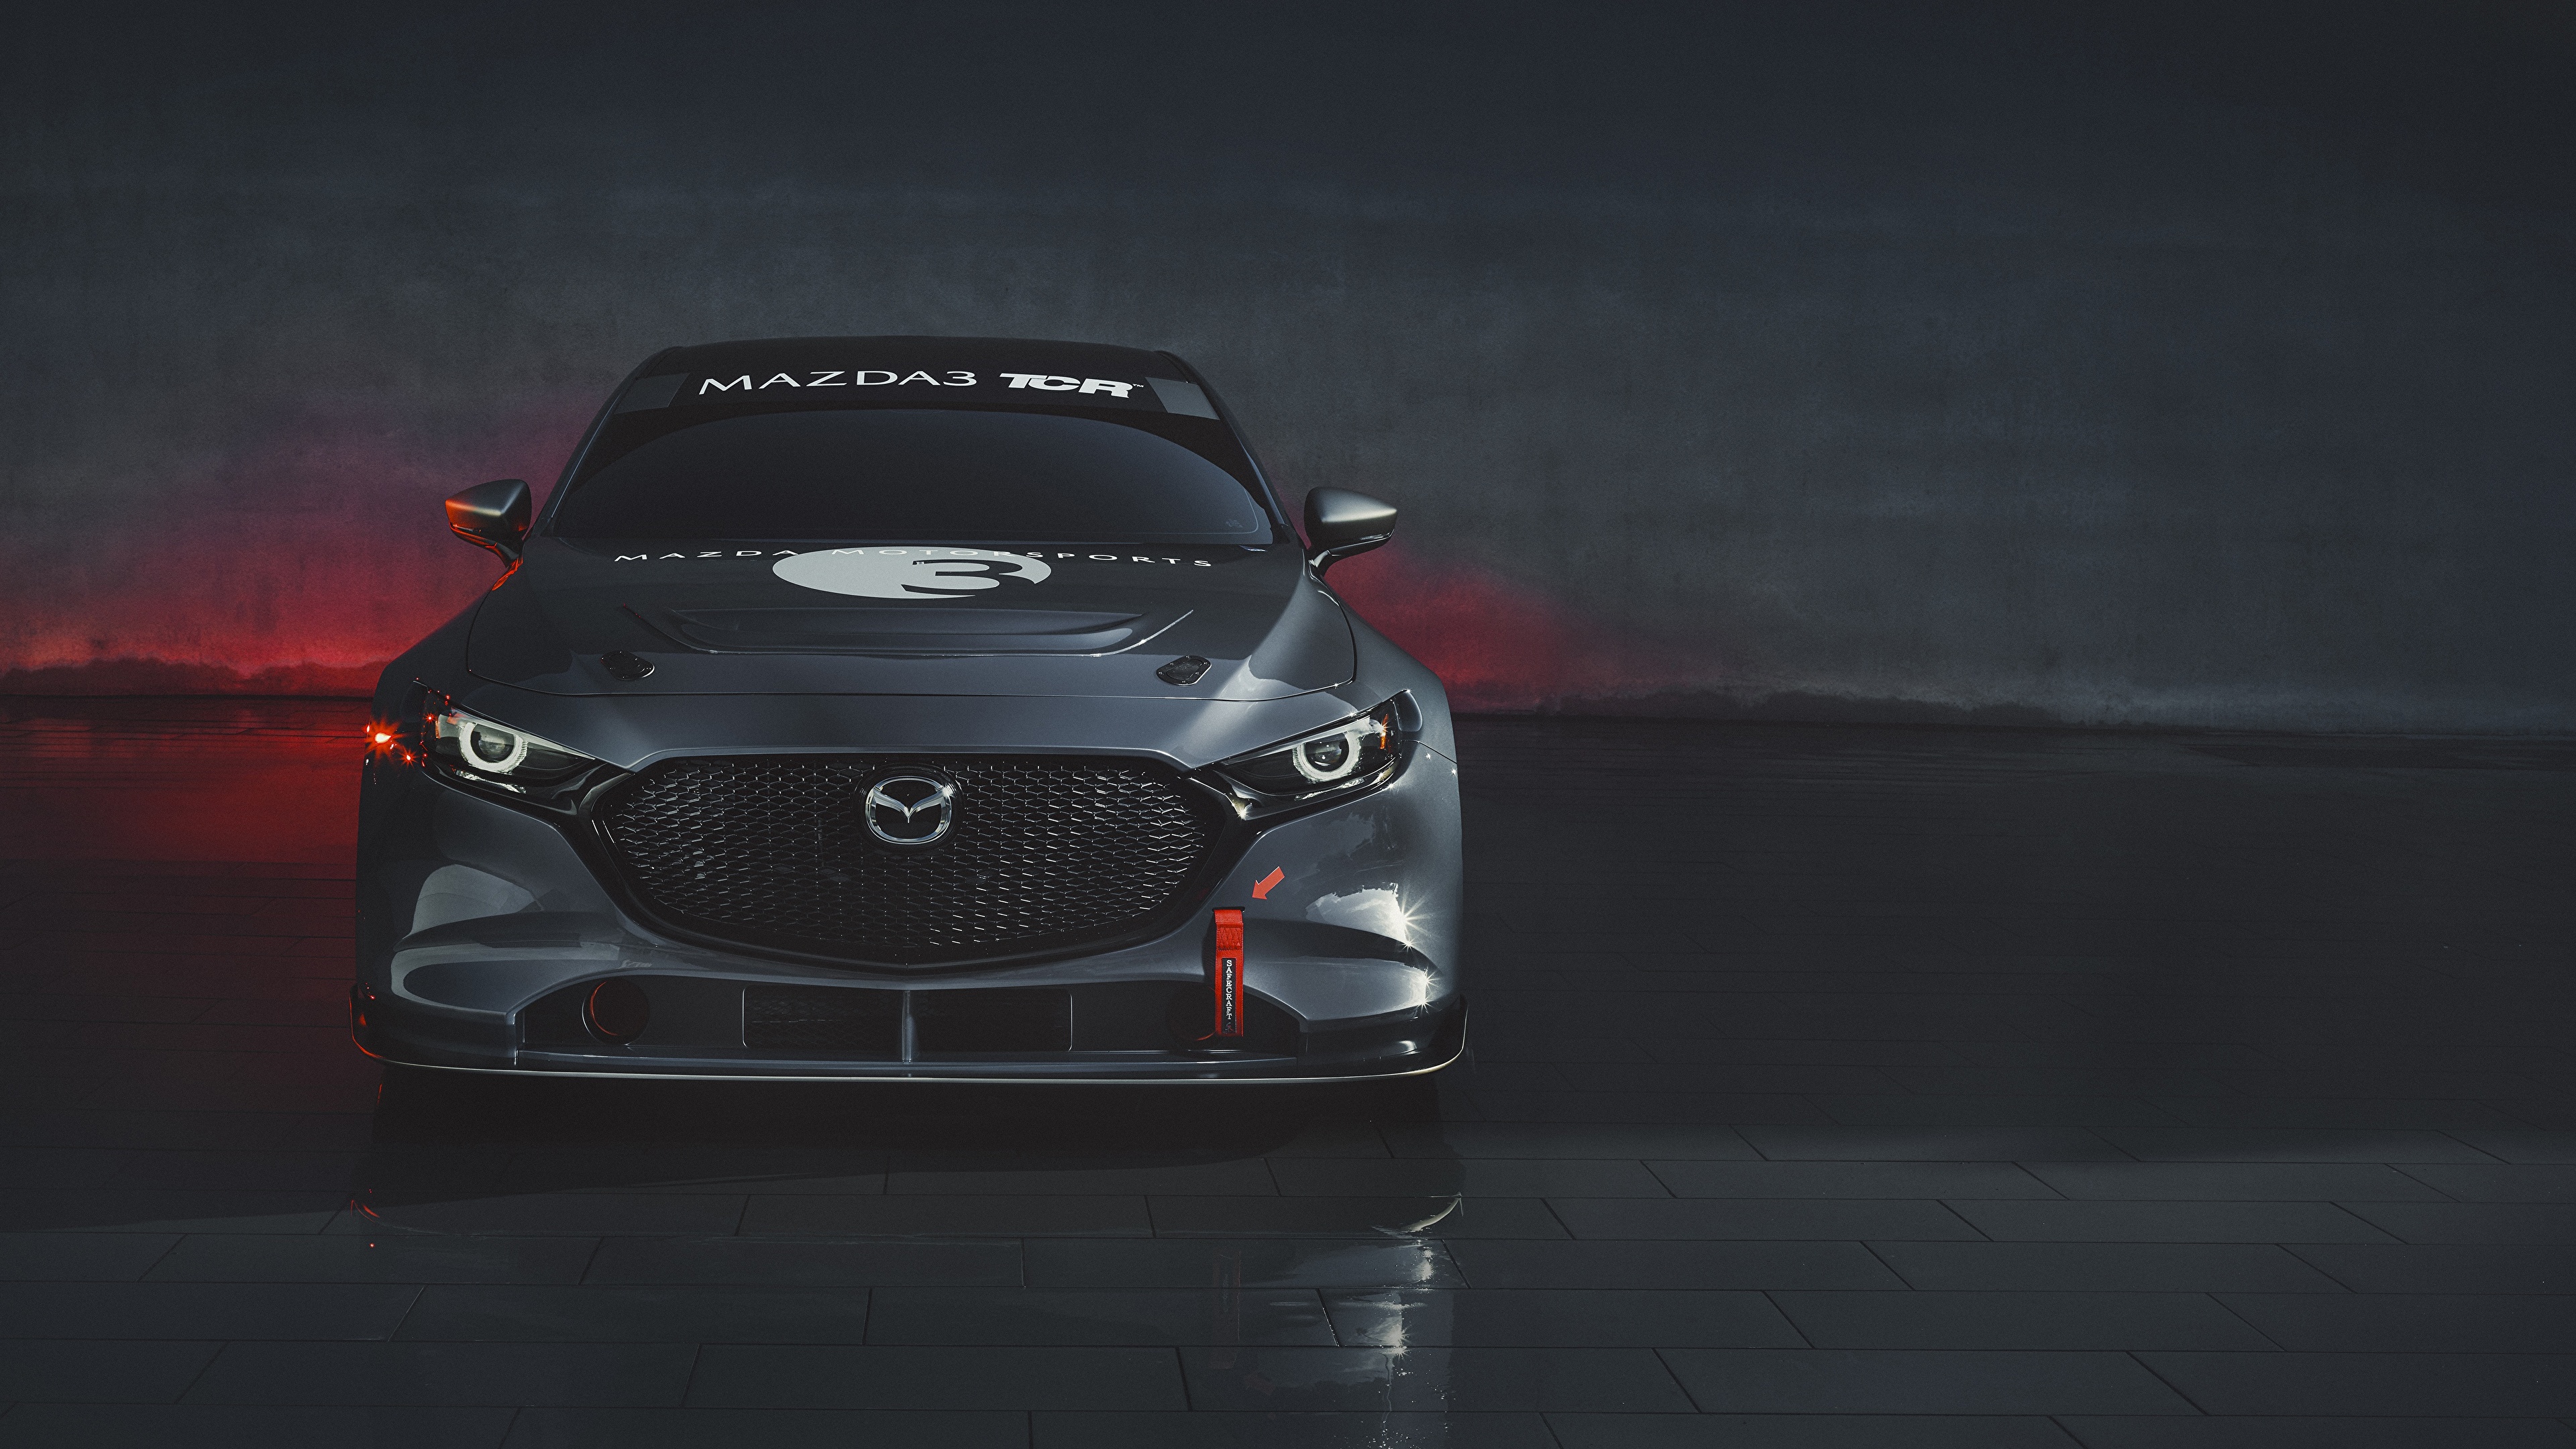 Pictures Mazda 3 Tcr Gray Auto Front 3840x2160